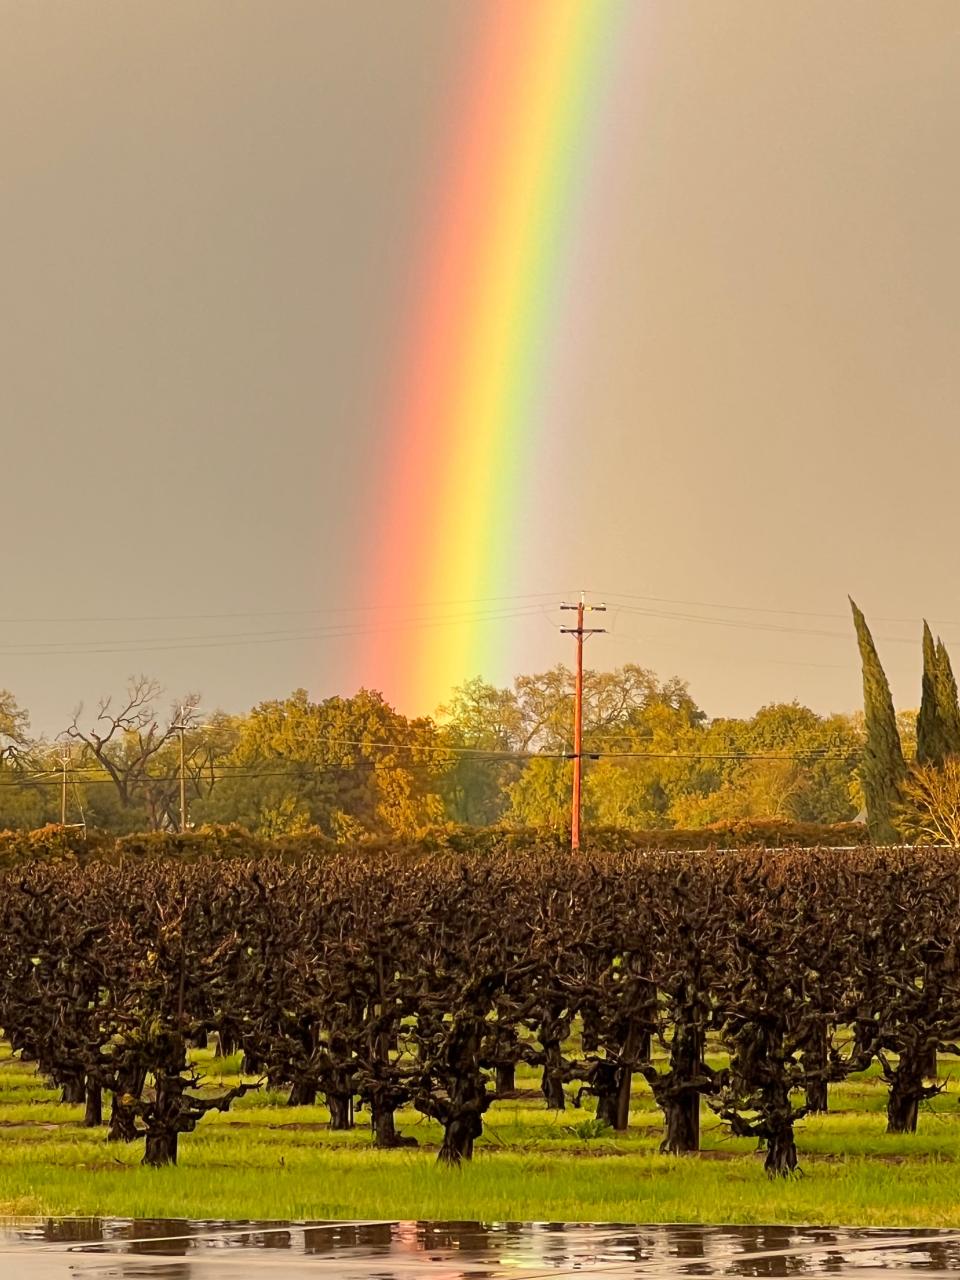 Bob Hallanger of Acampo used an apple iPhone 13 to photograph a rainbow over a vineyard along East Jahant Road in Acampo.